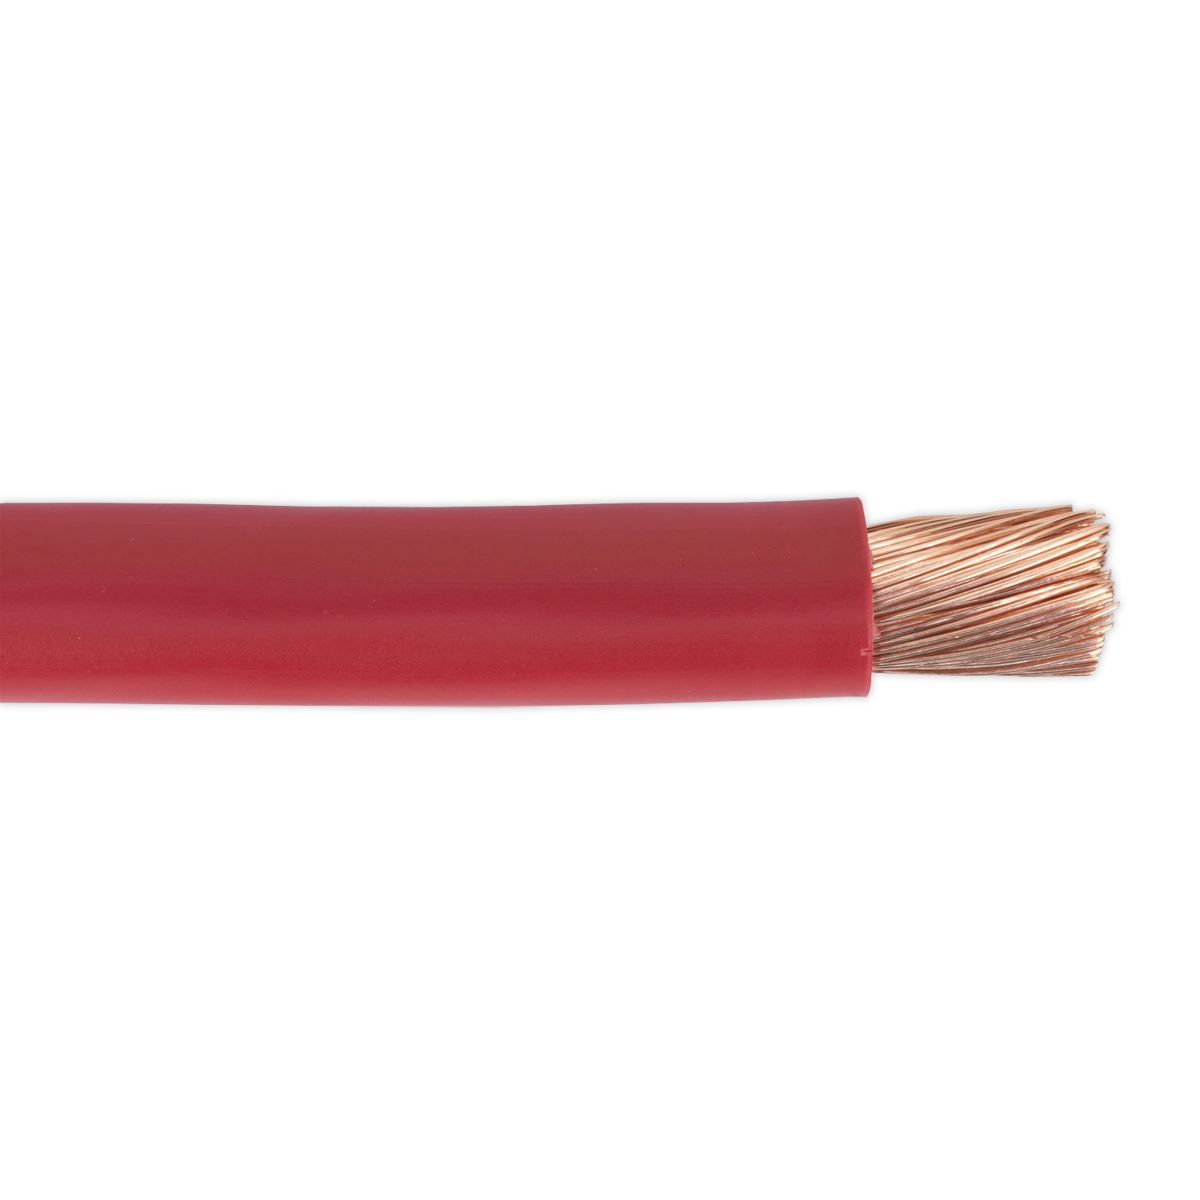 Sealey Automotive Starter Cable 315/0.40mm 40mm² 300A 10m Red